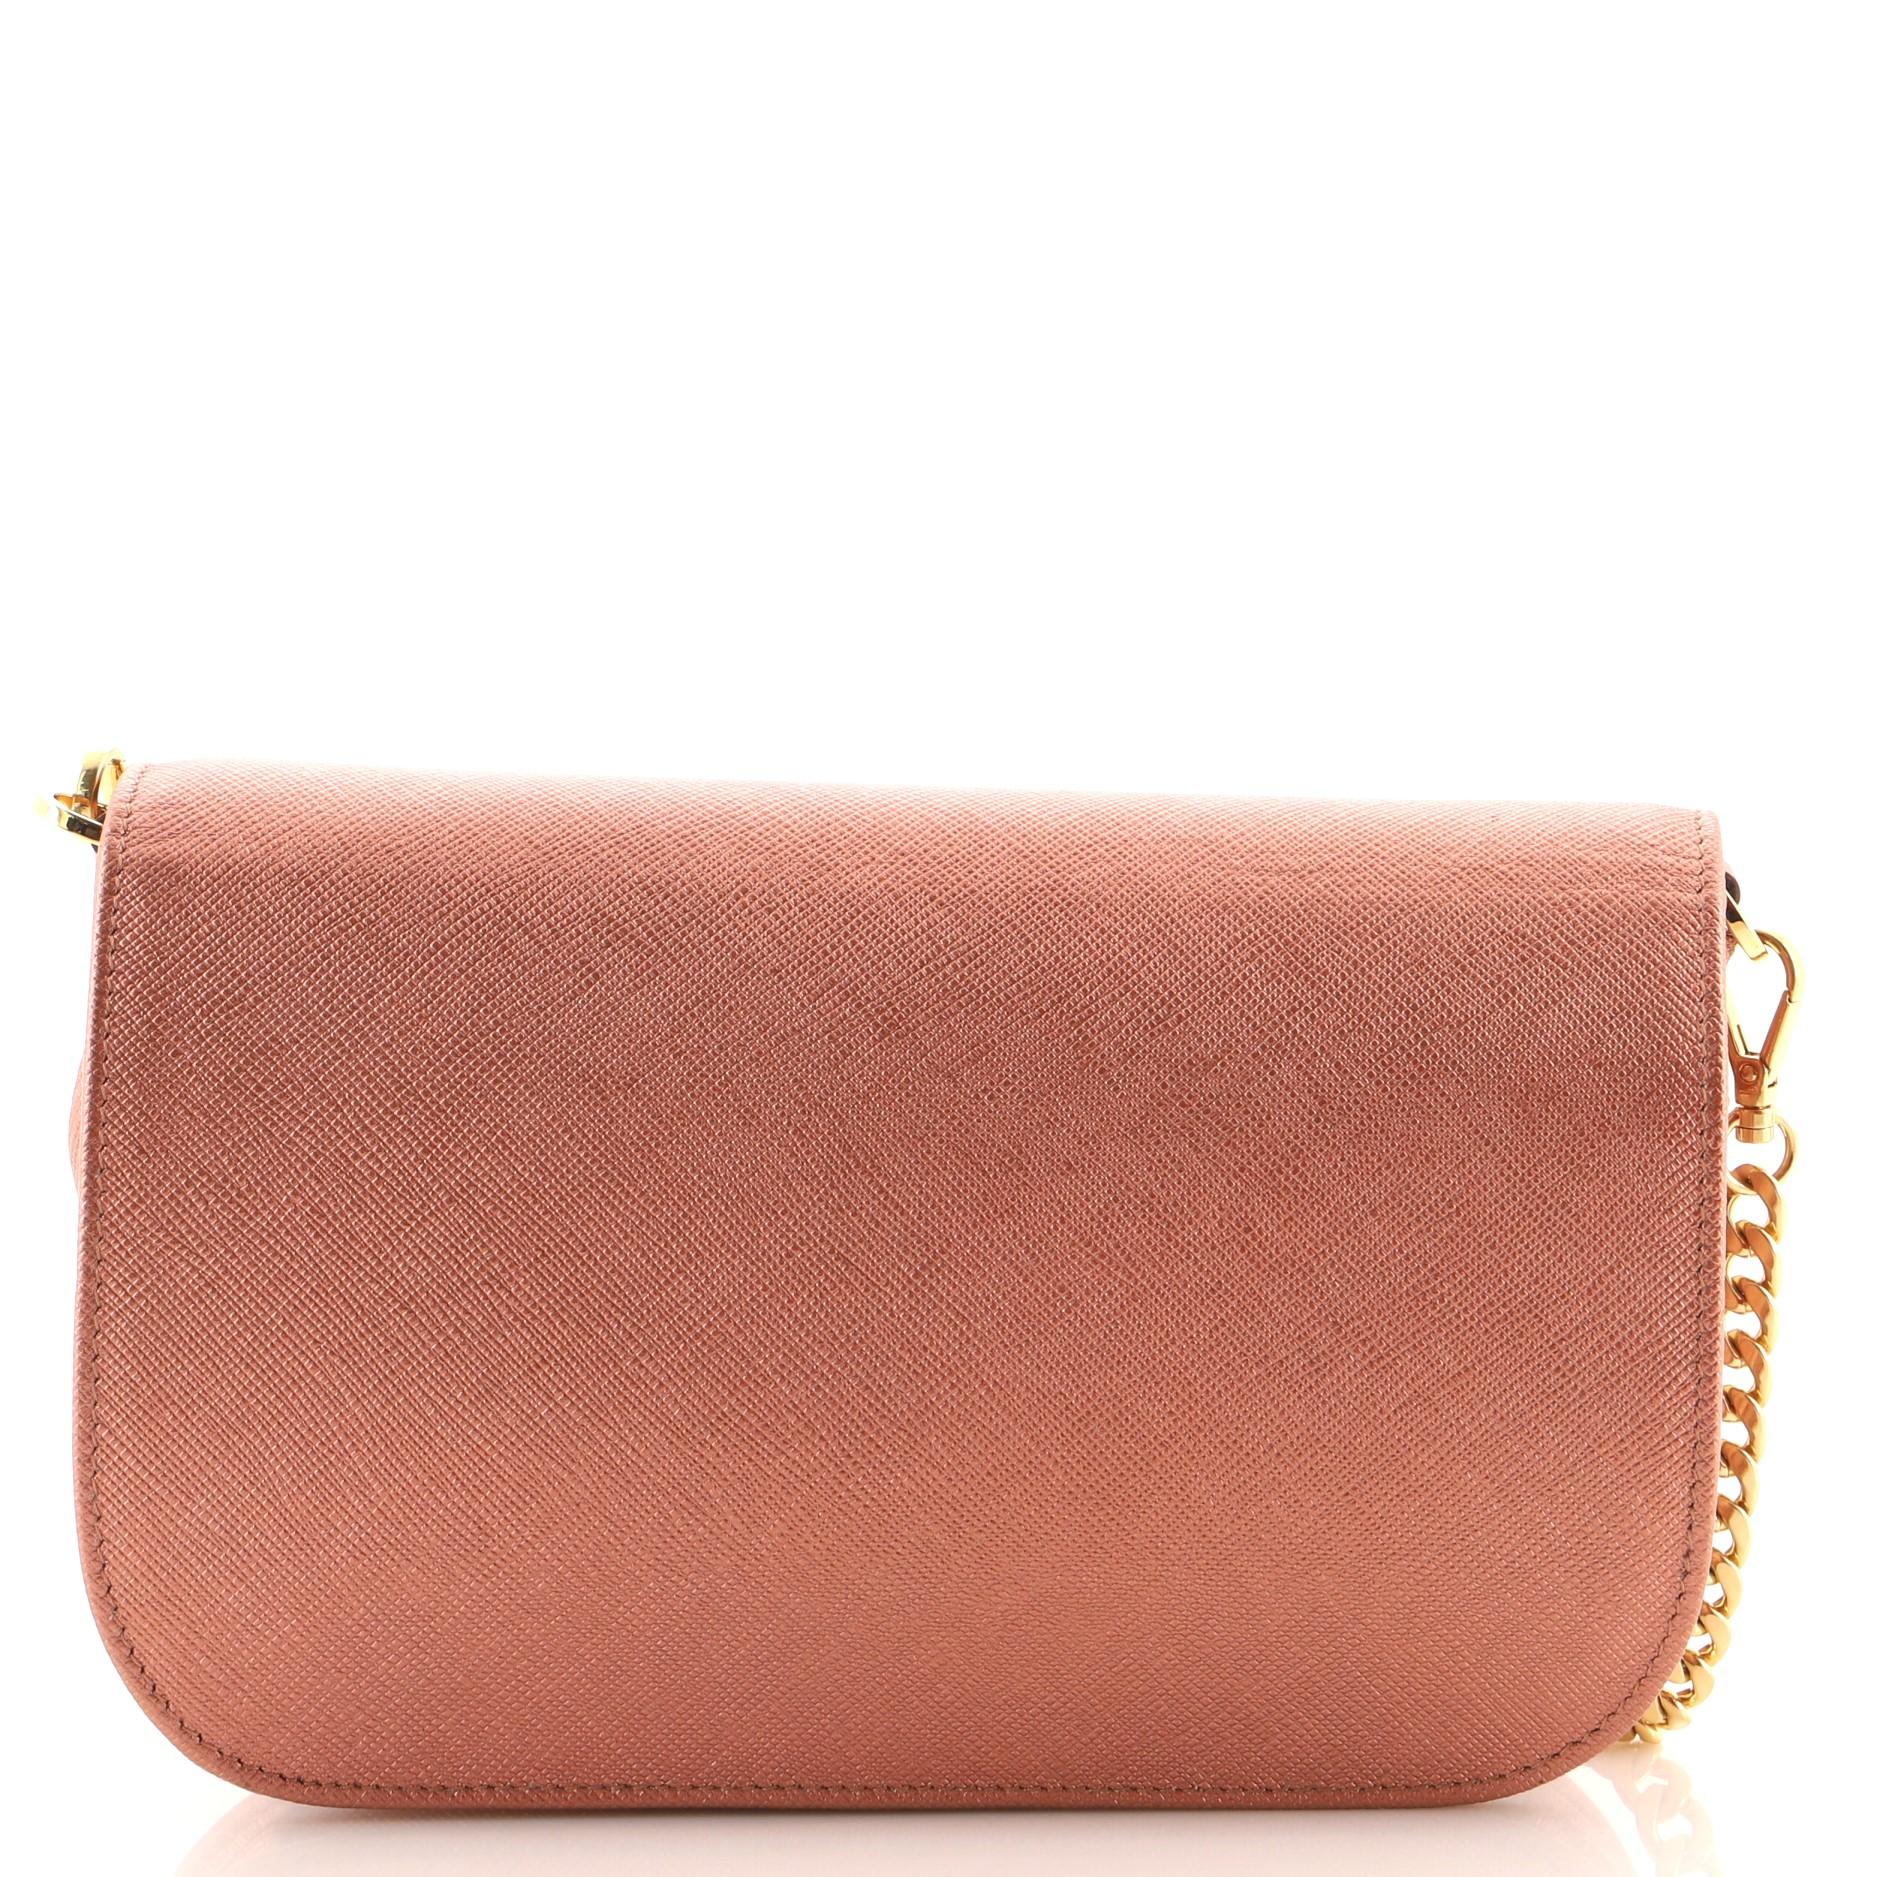 saffiano clutch with flap